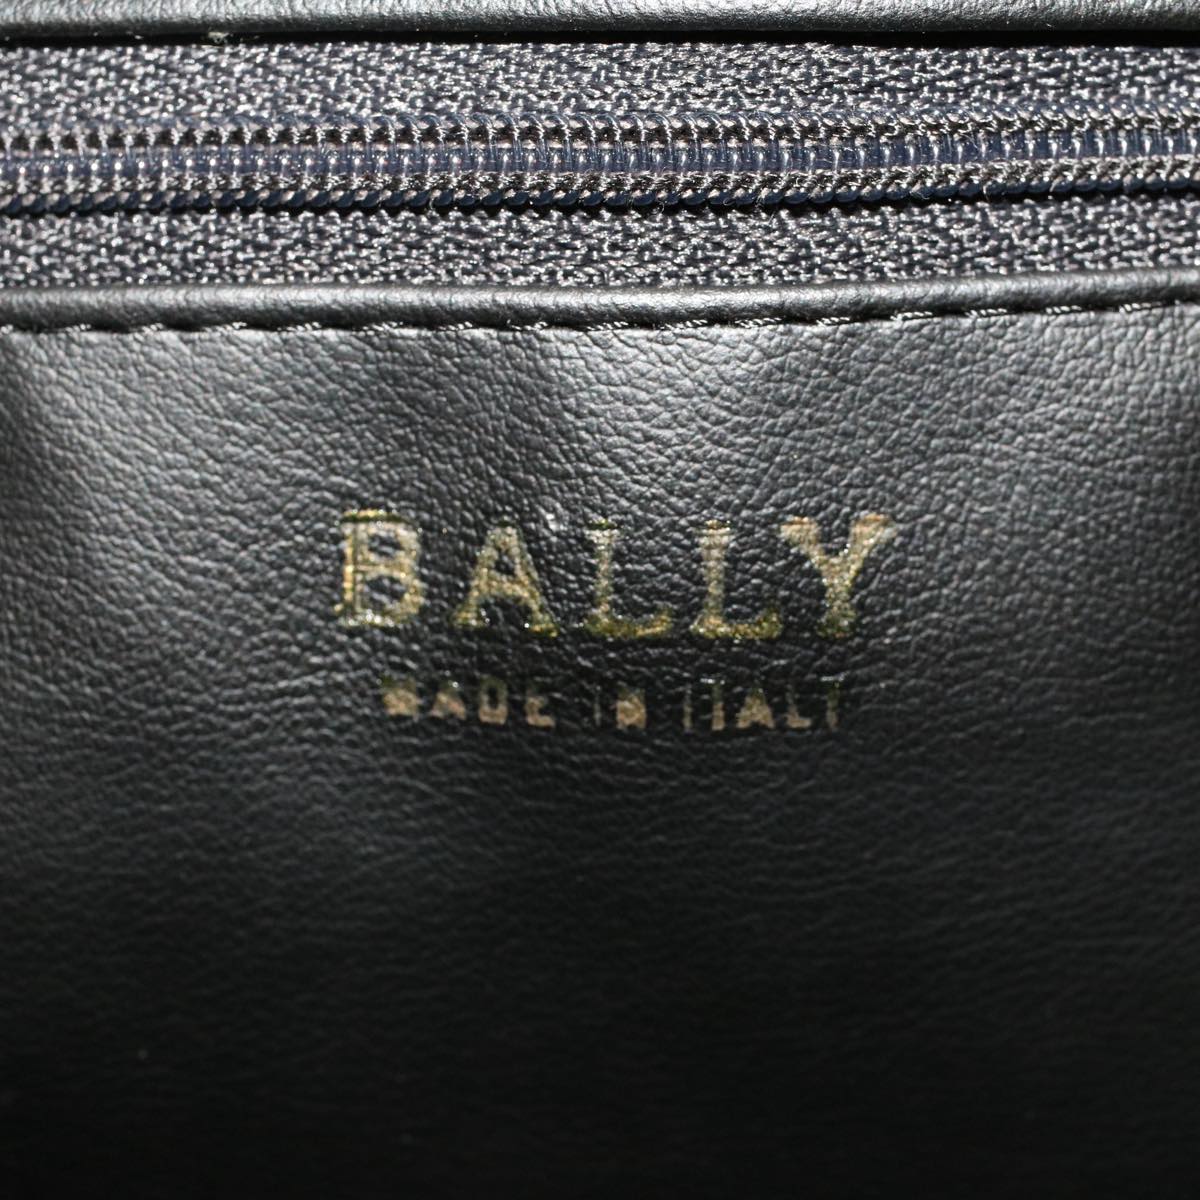 BALLY Quilted Hand Bag Leather White Auth yk8035